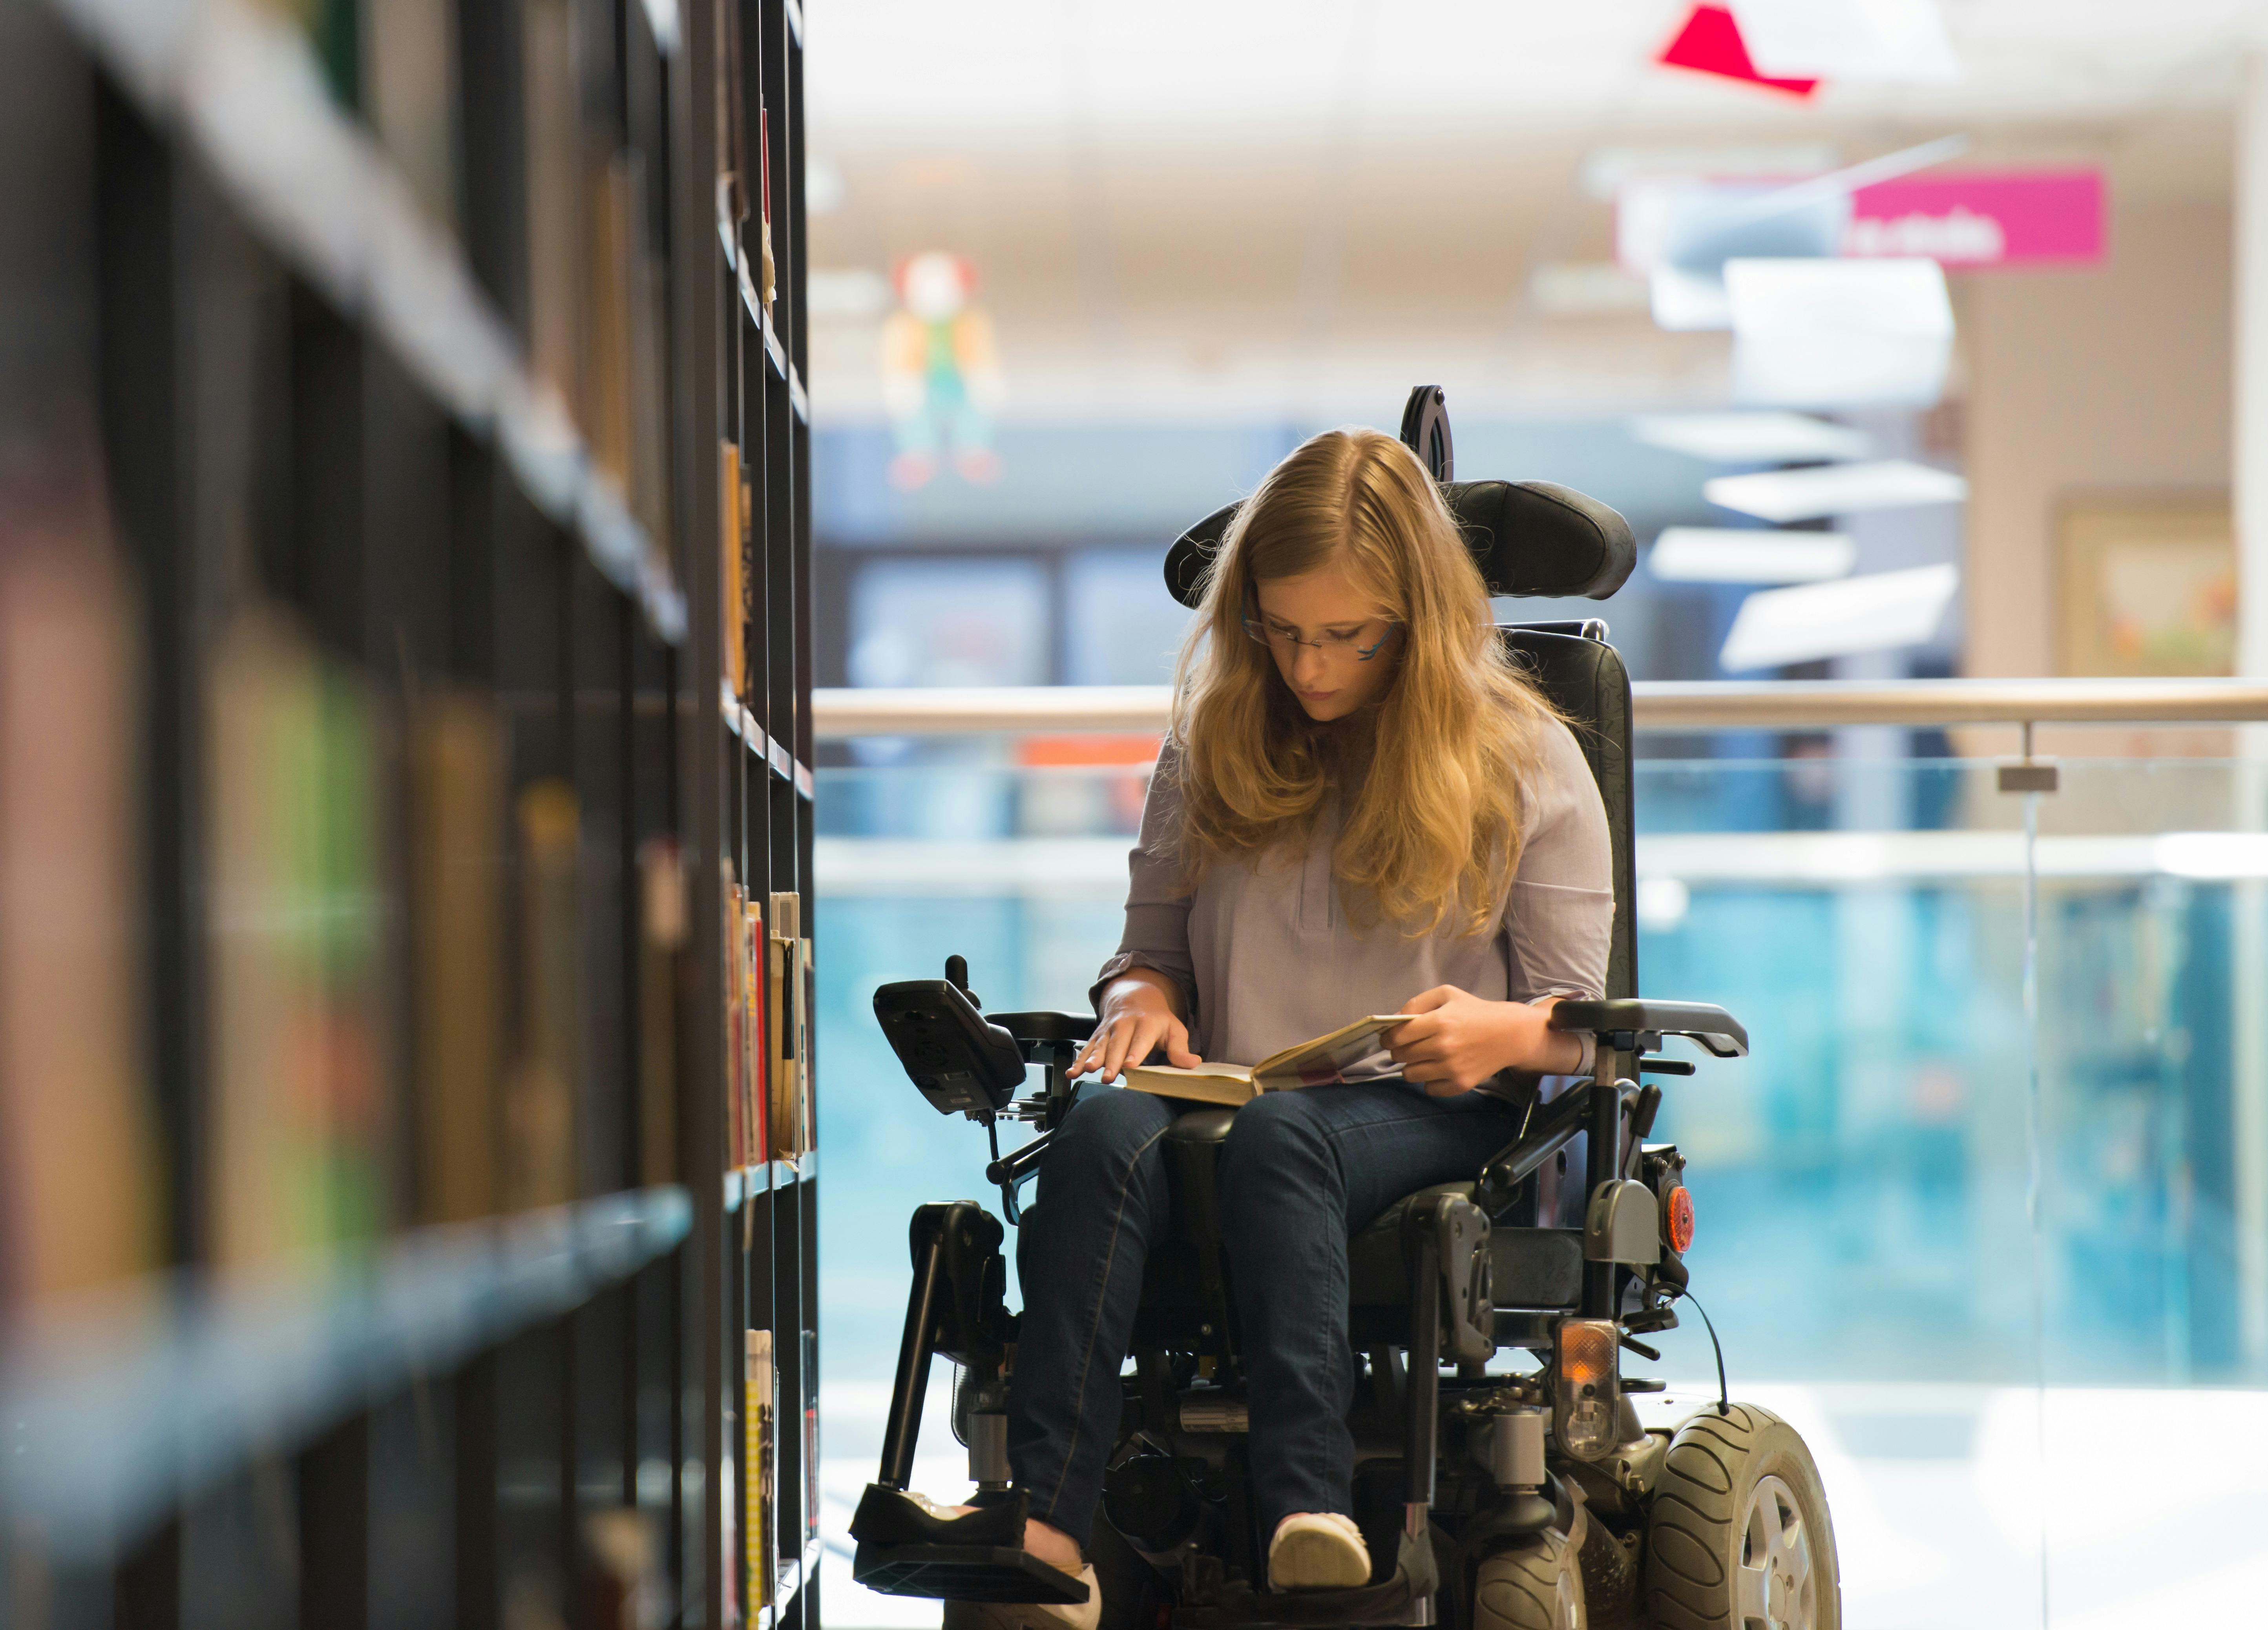 Student using an electric wheelchair in a library